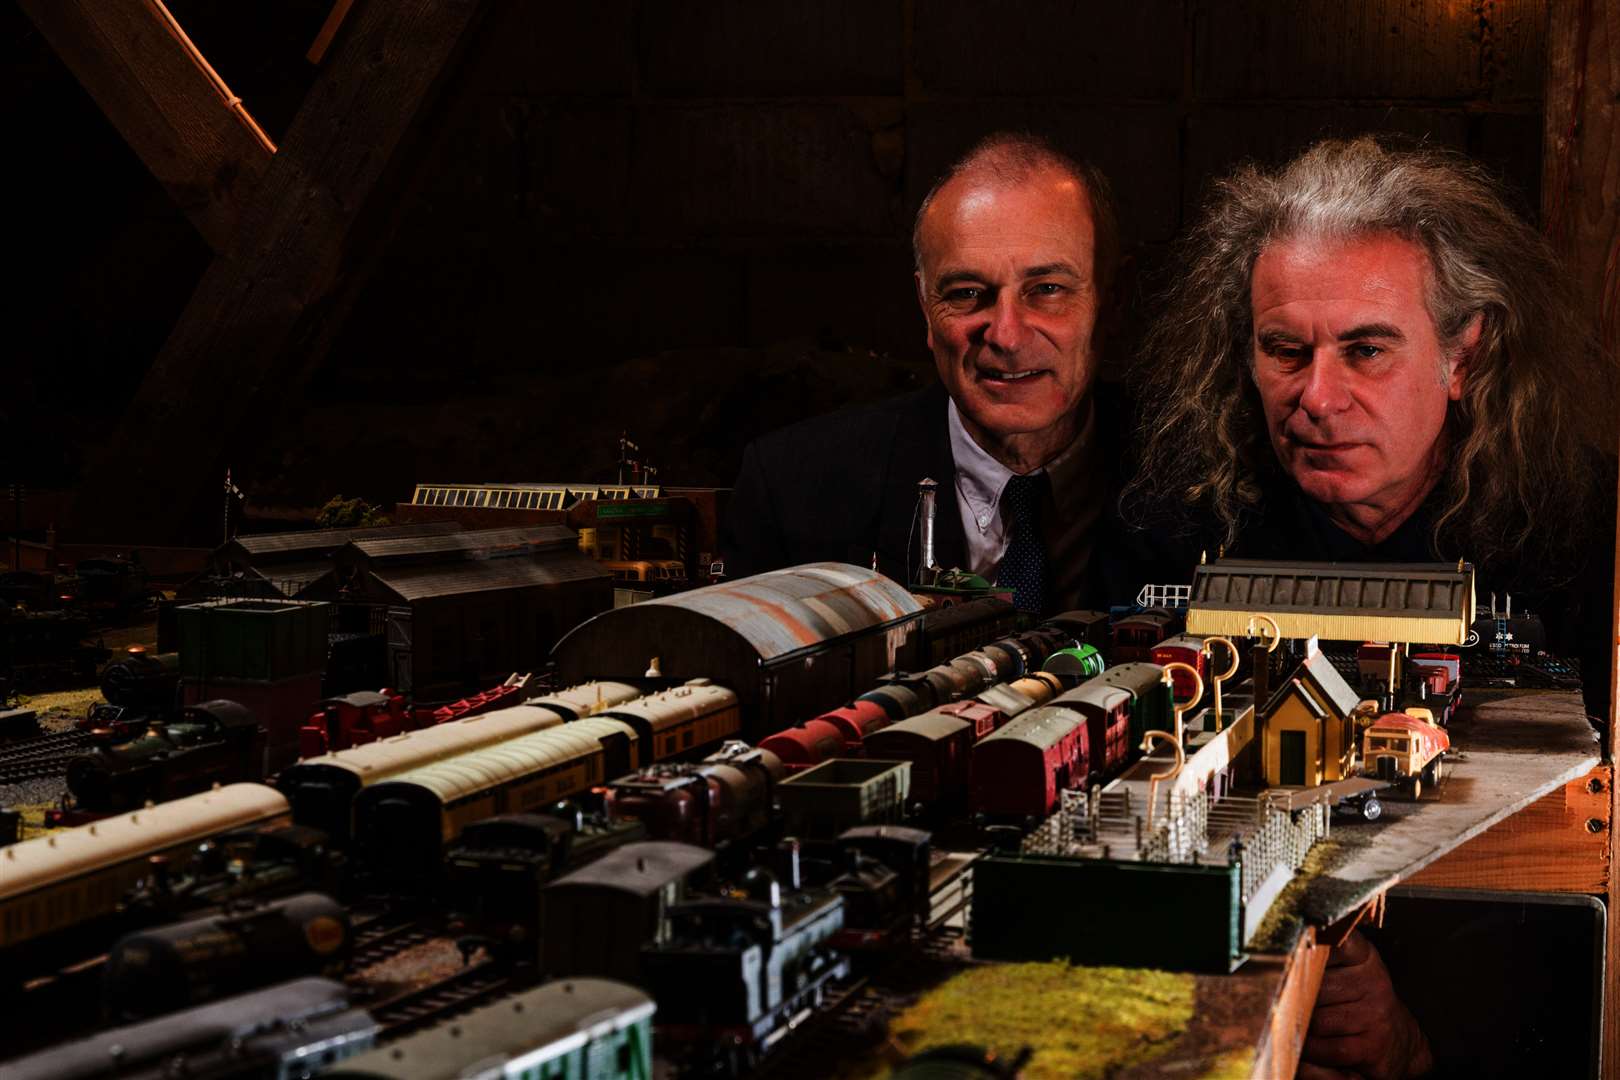 Sons Paul and Simon with the impressive model set built by their father. Picture: SWNS